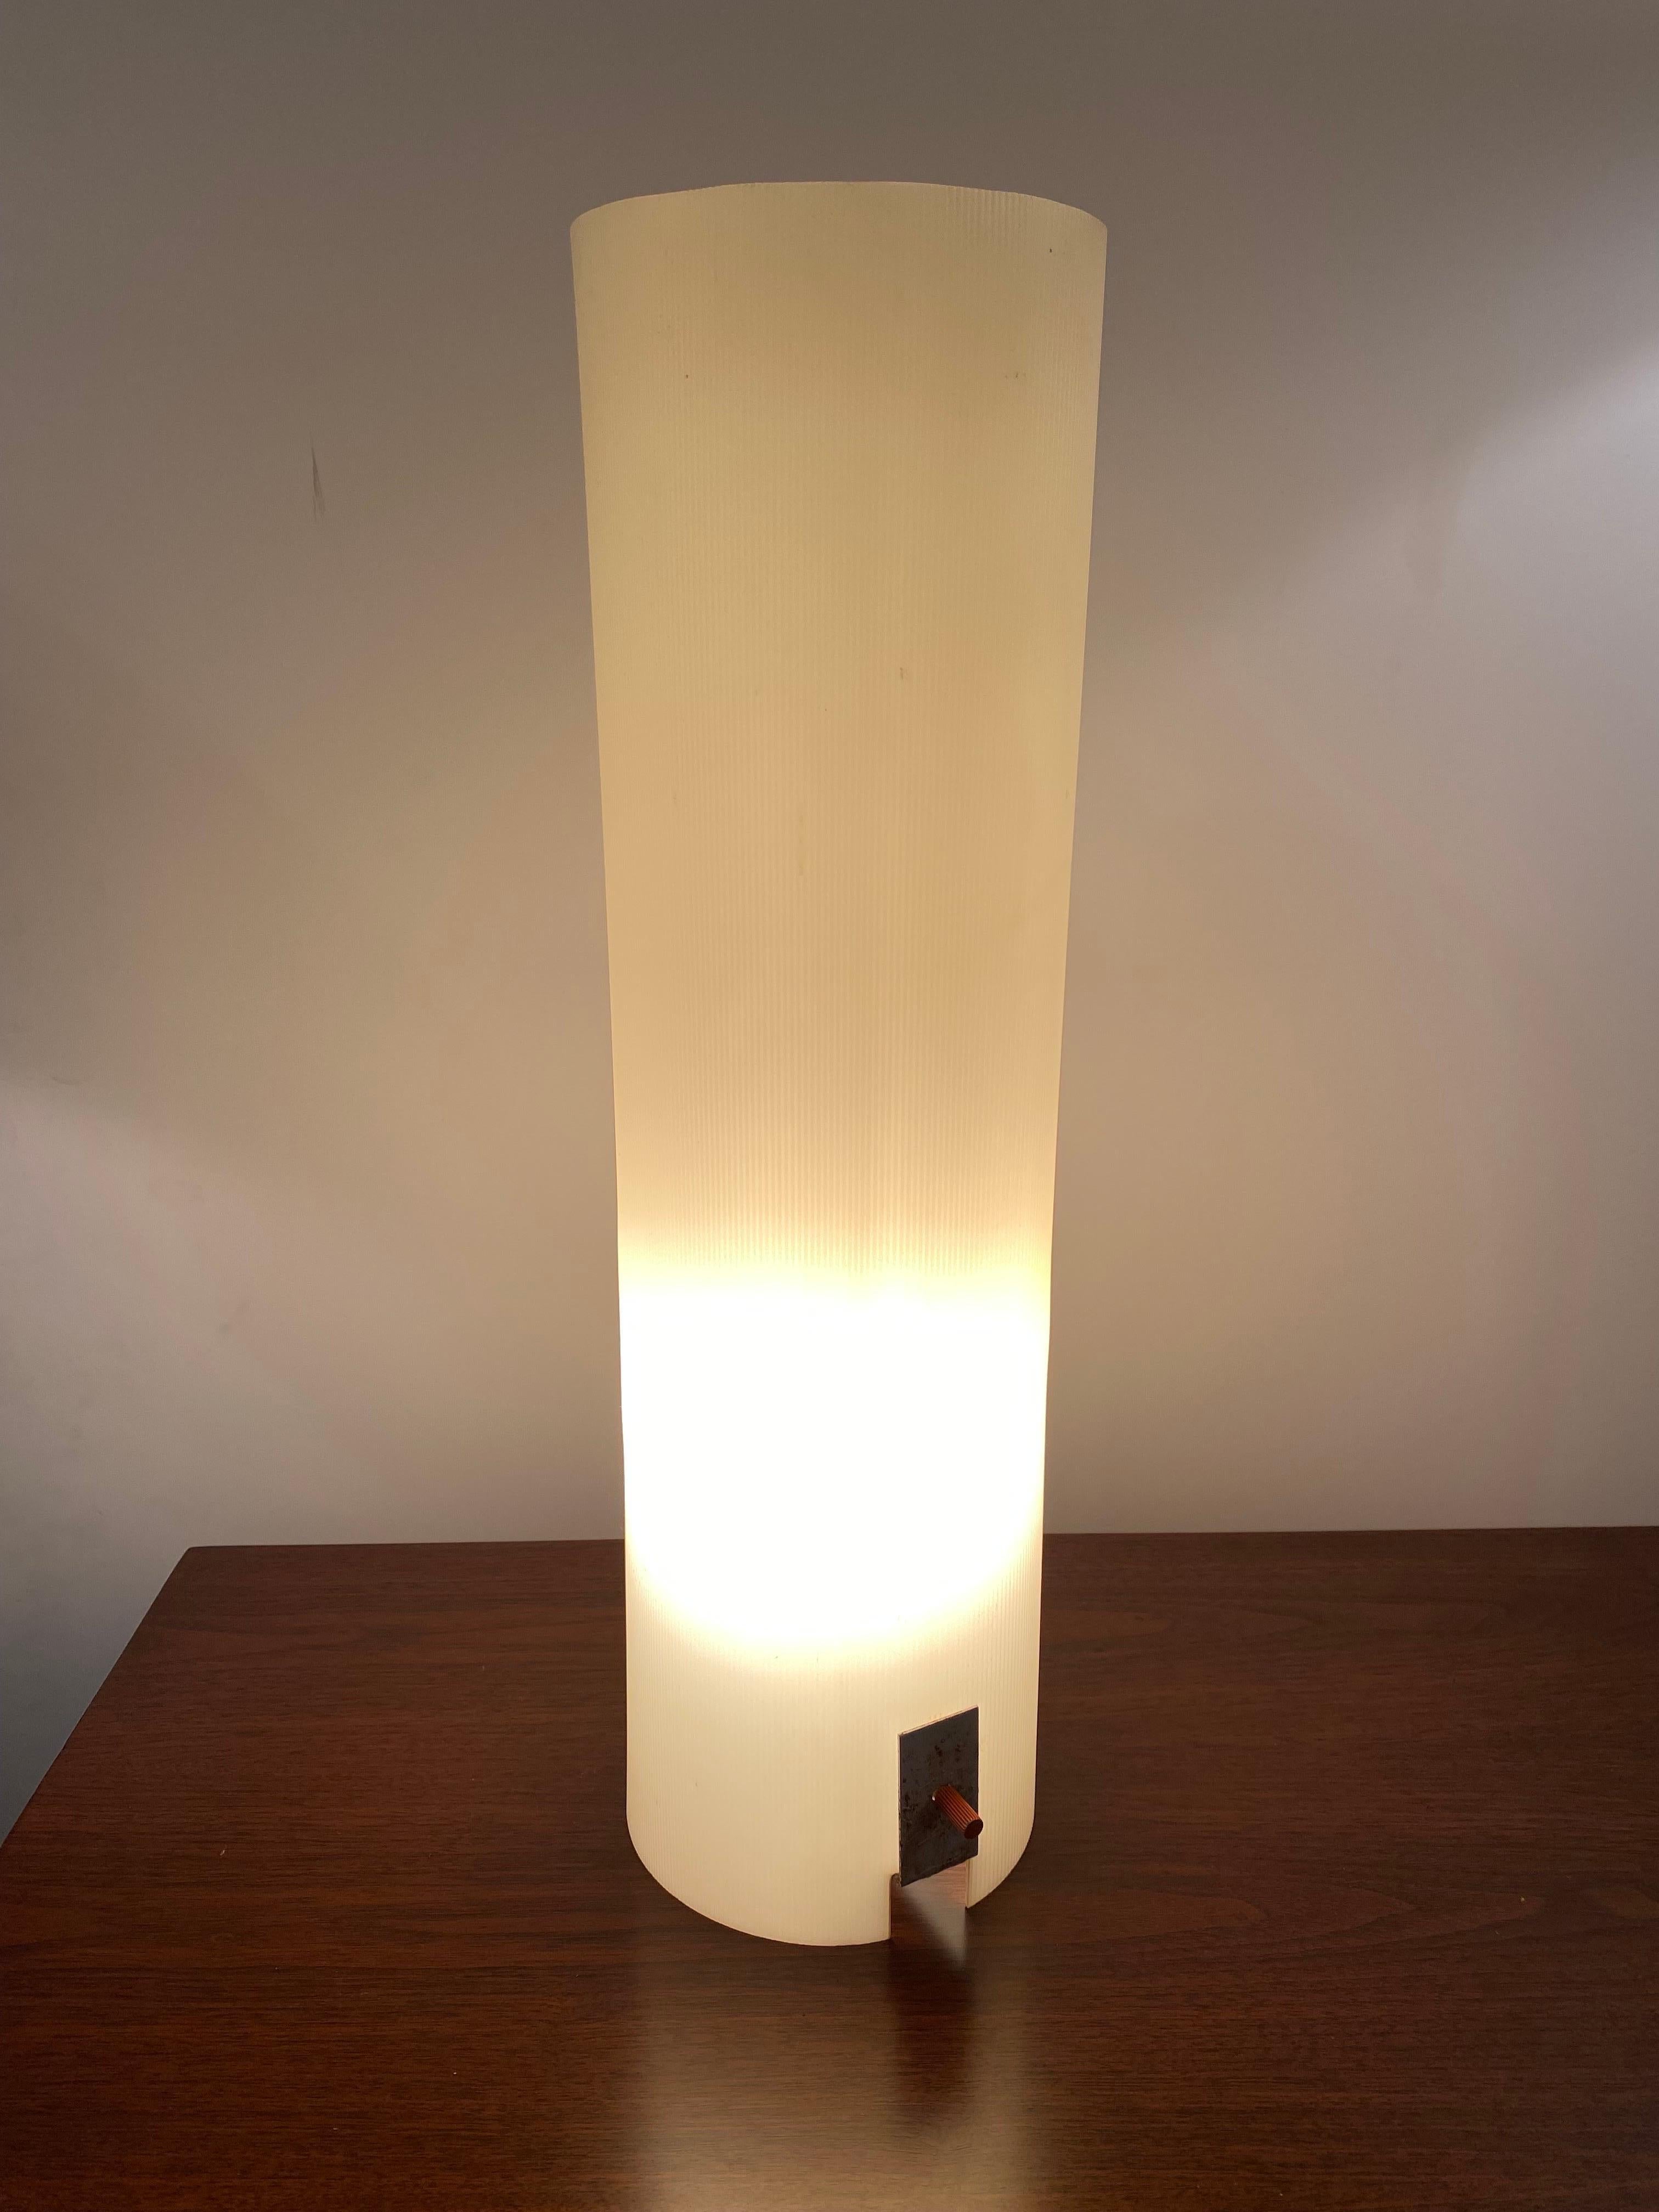 Minimalist lamp by Bill Curry for his company, Design Line. Designed and manufactured in El Segundo, CA in the 1960s. Hard extruded ribbed plastic with enameled white metal frame. The lamp is luminous when lit.  Three way switch.

Bill Curry's work